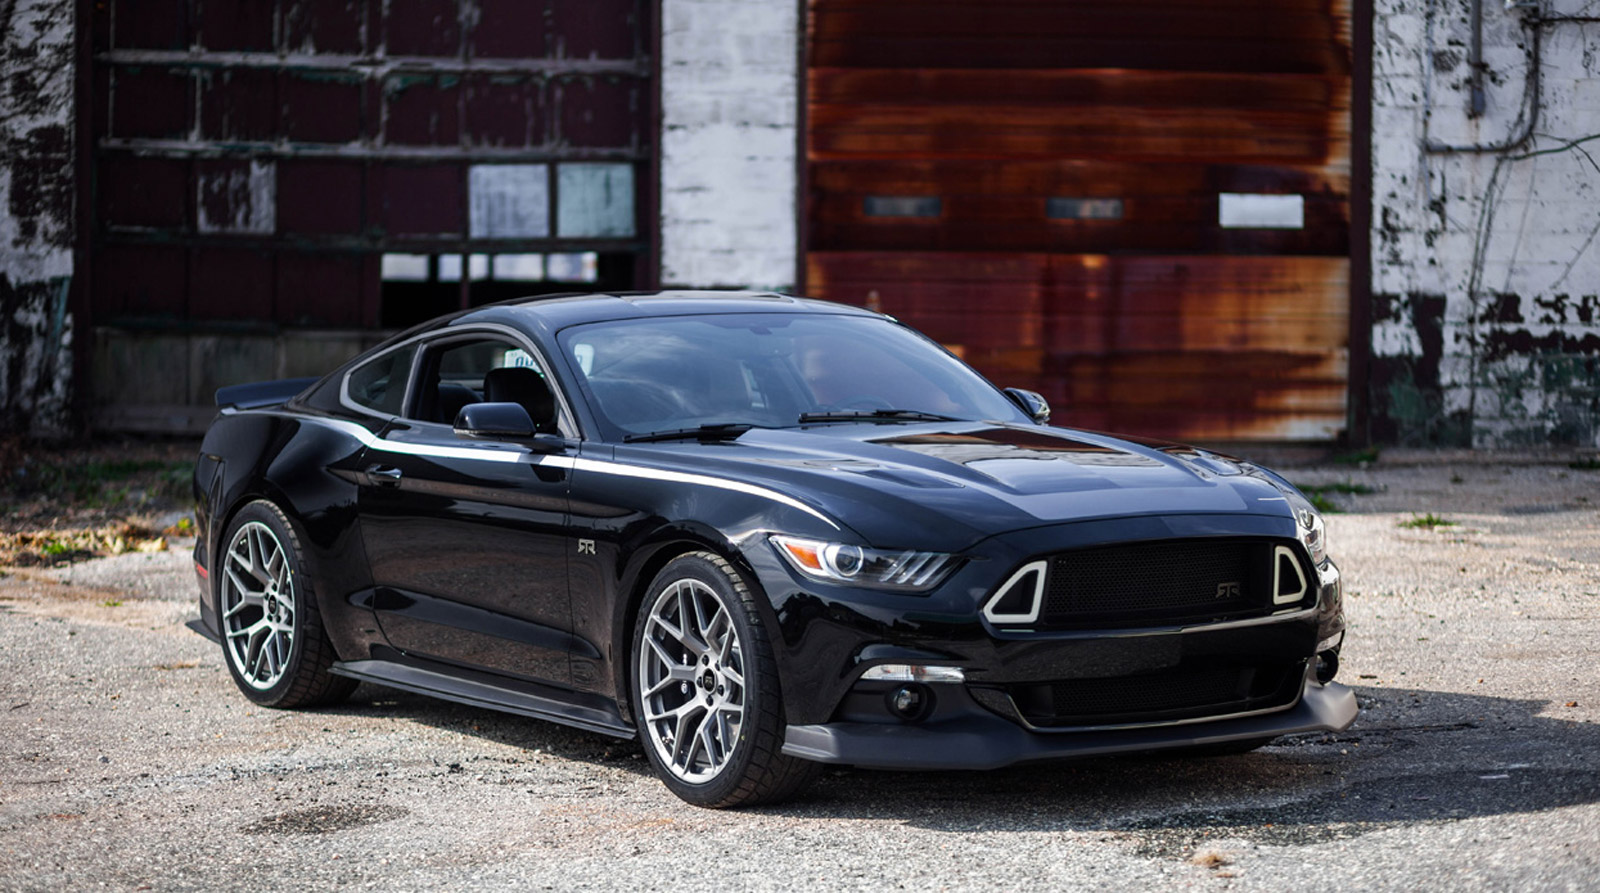 2015 Ford Mustang RTR Revealed, Offers Up To 725 Horsepower